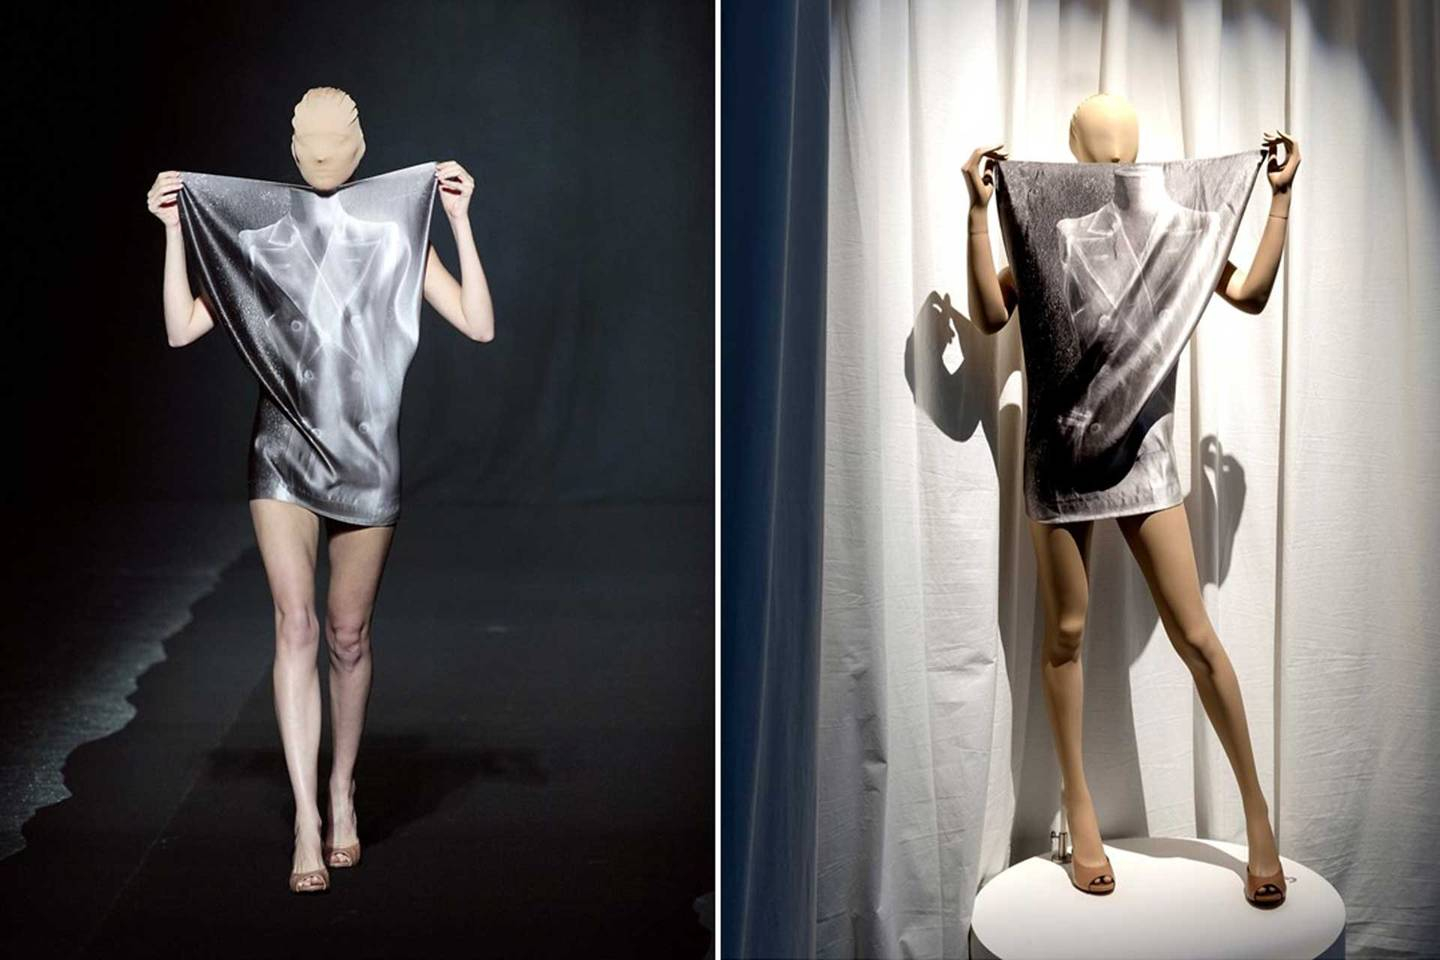 Martin Margielas Poster dress on the runway at his Spring/Summer 2009 collection (left), and on display at the Palais Galliera (Photo: GETTY (LEFT); PALAIS GALLIERA (RIGHT))